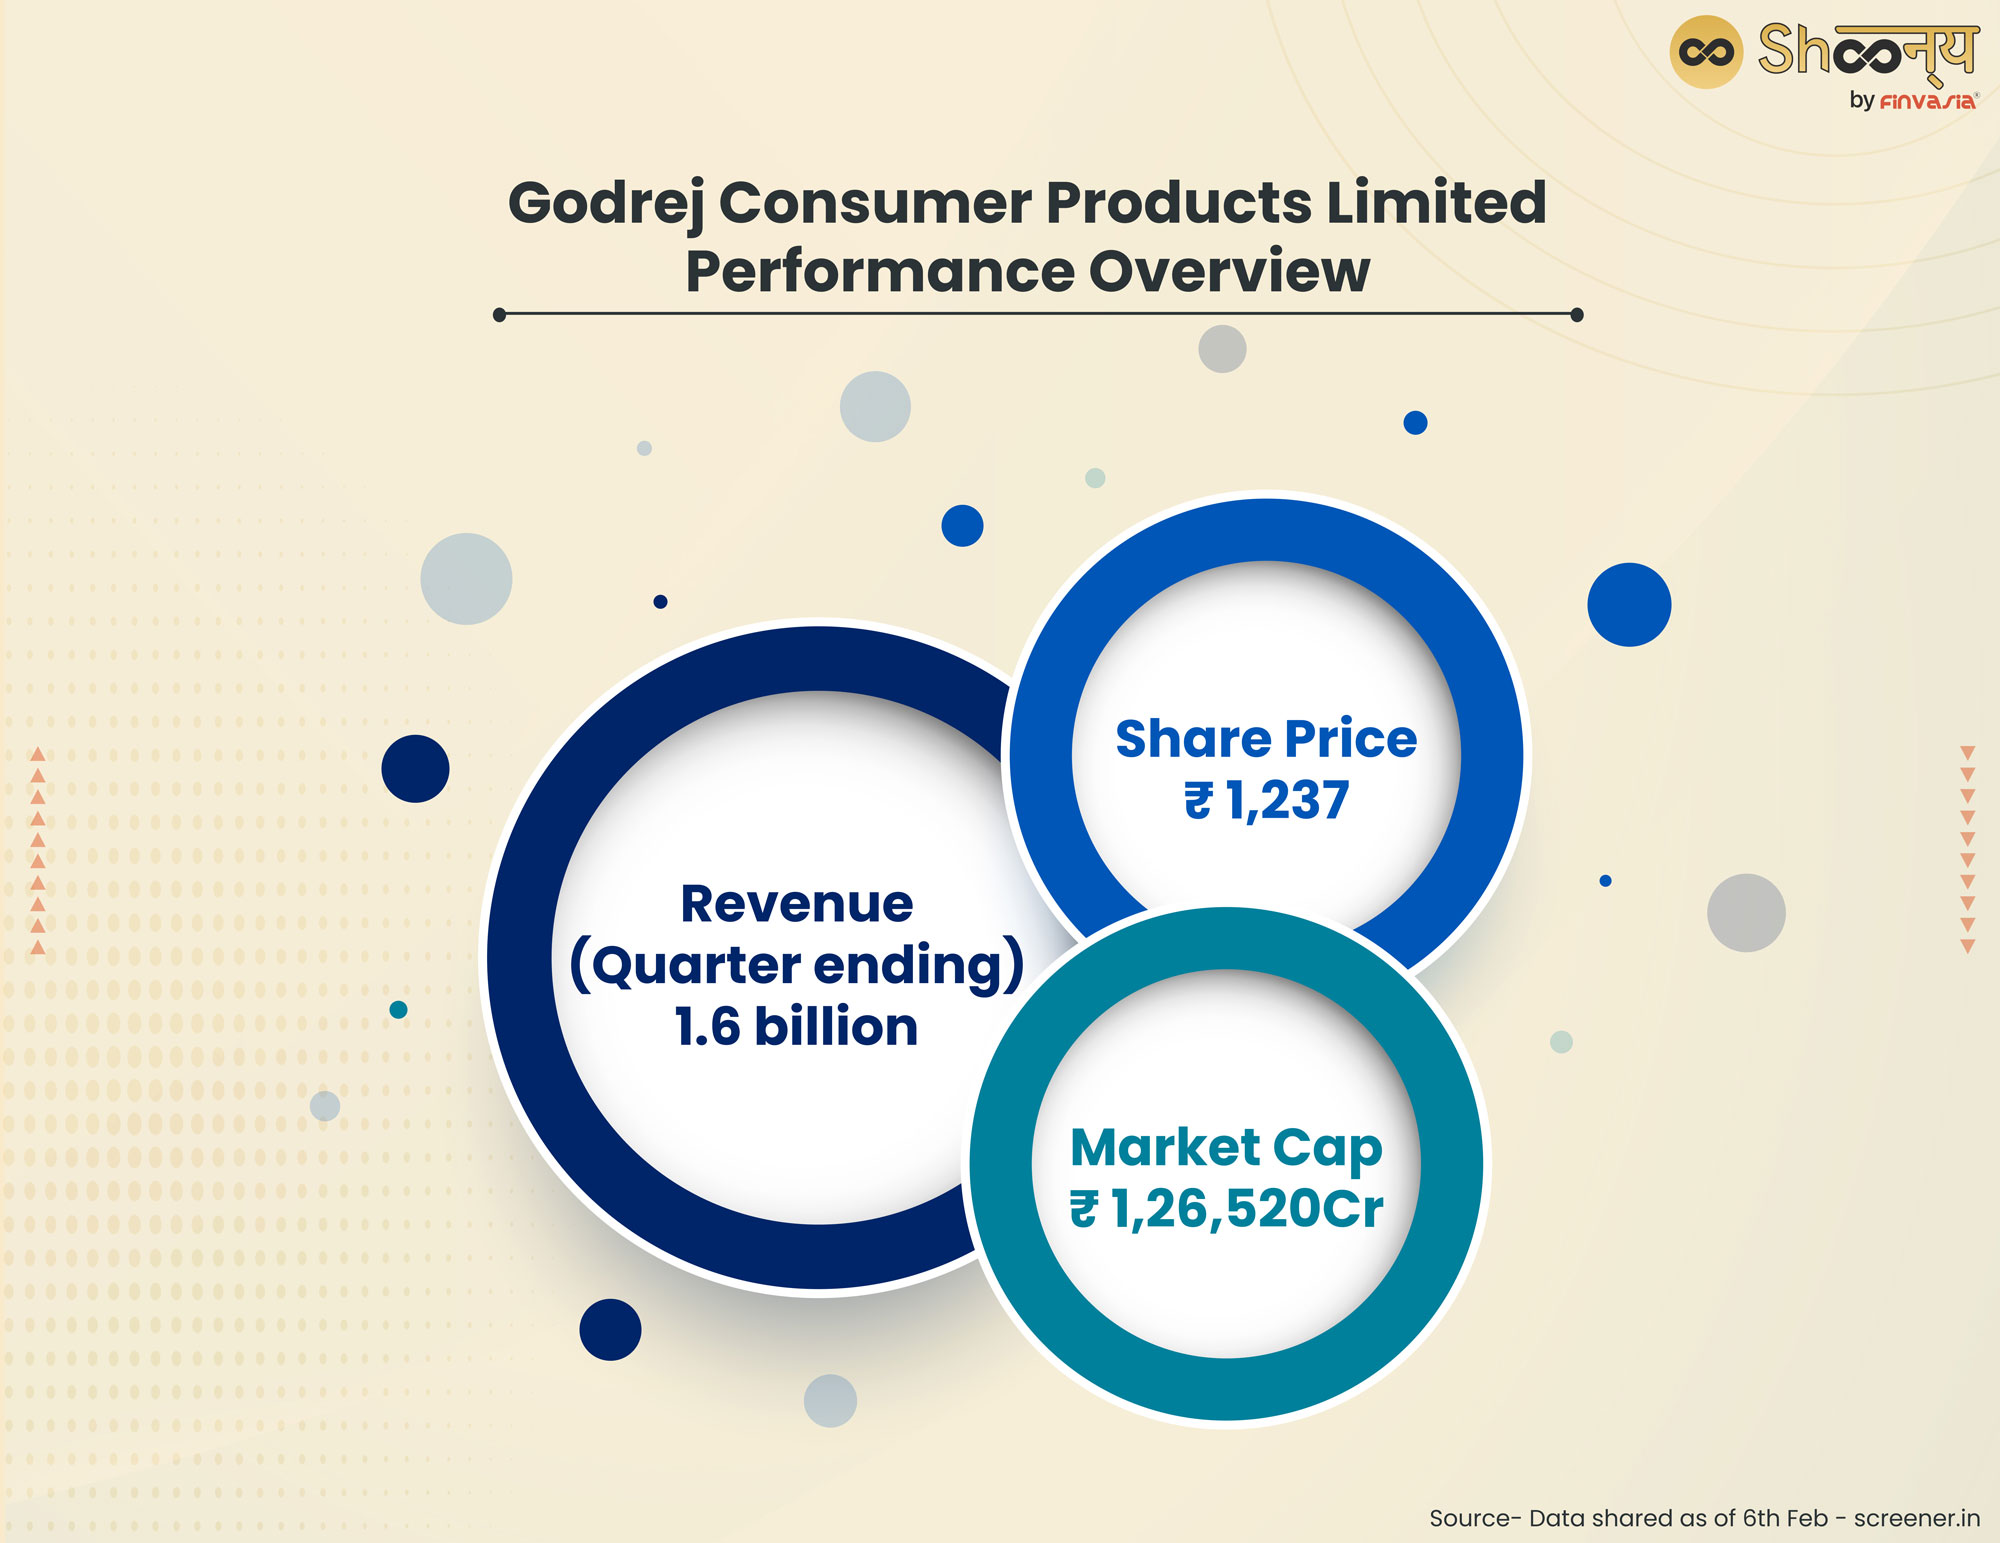 Godrej Consumer Products Limited: Performance Overview